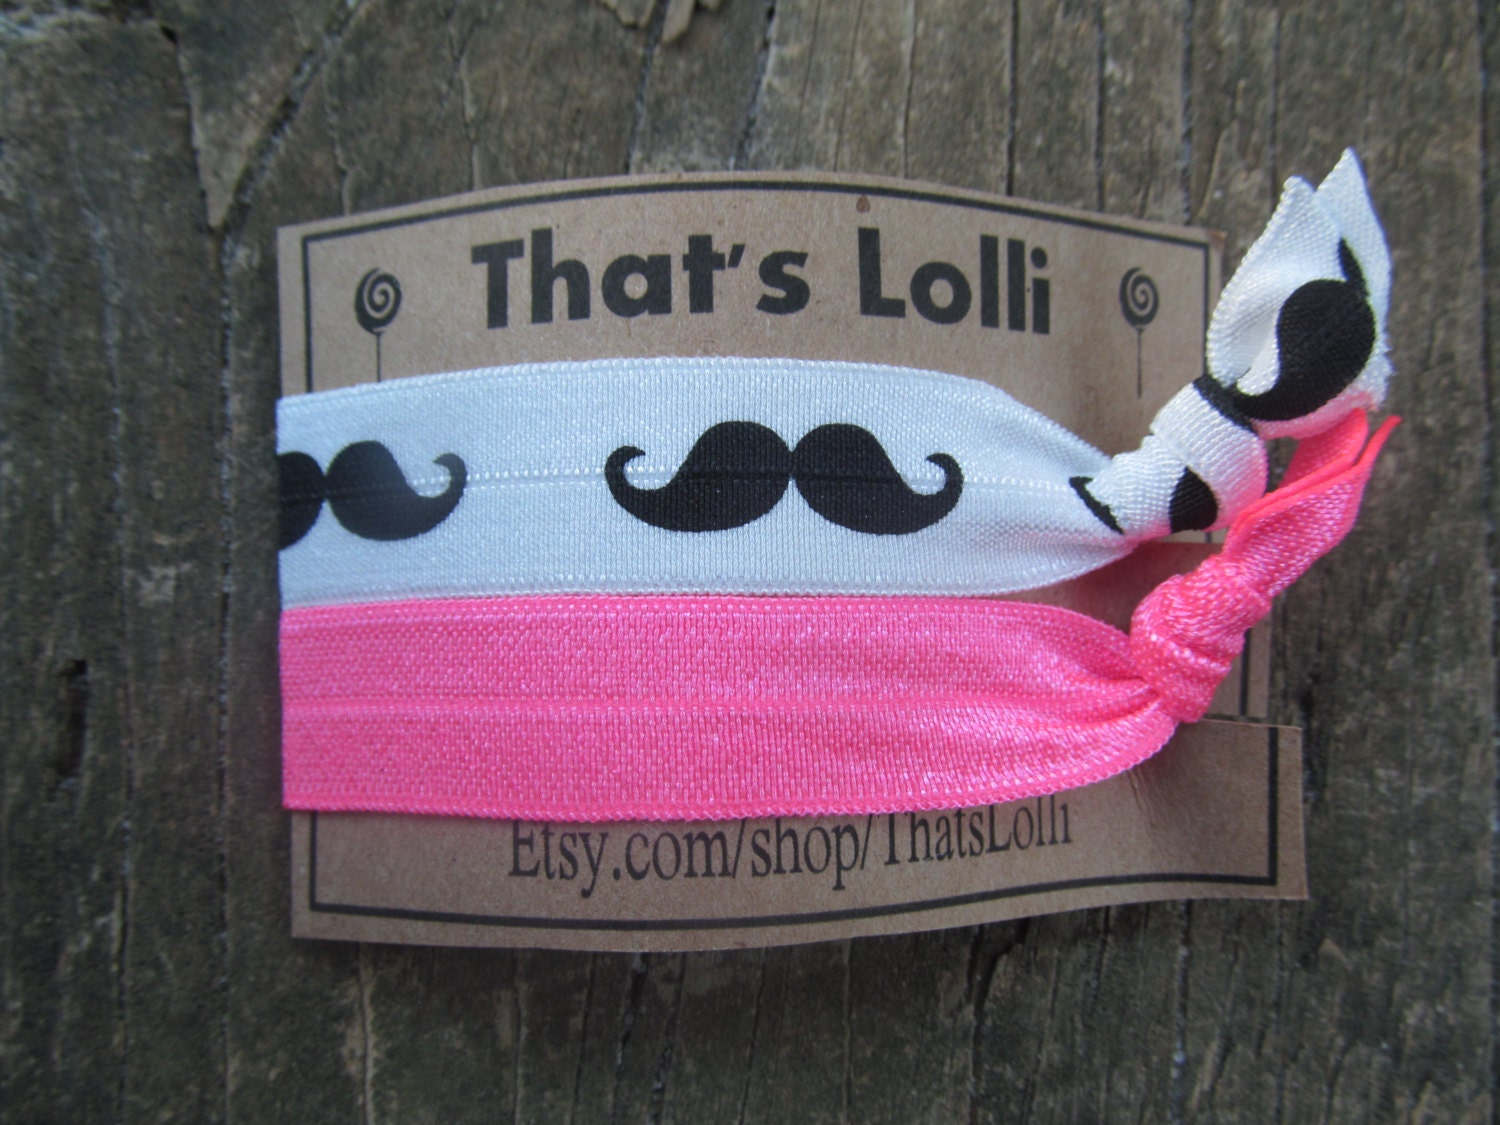 Mr. Stache and Hot Pink hair ties